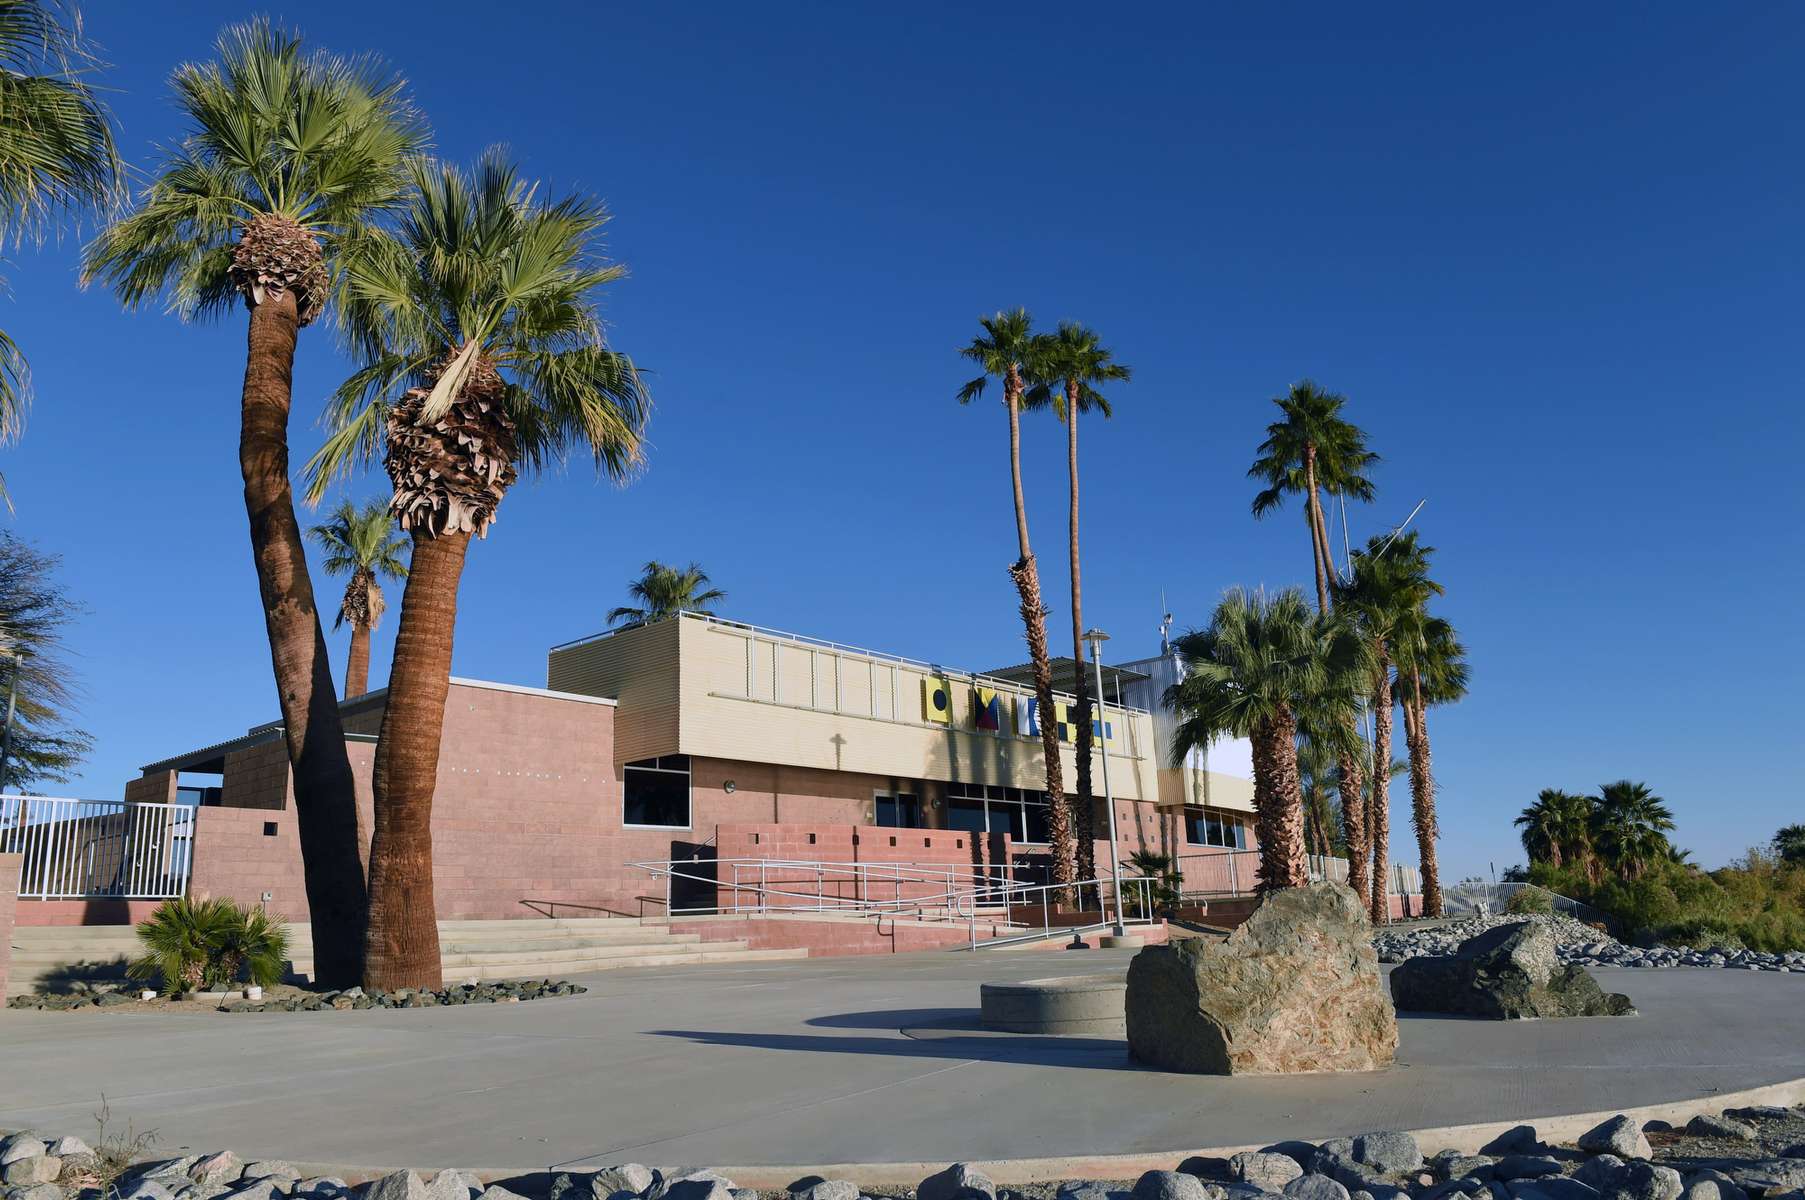 The North Shore Beach and Yacht Club in the Salton Sea was originally opened in 1959 and shuttered in 1984. It has been restored and is now a community center. Photo taken January 30, 2022.